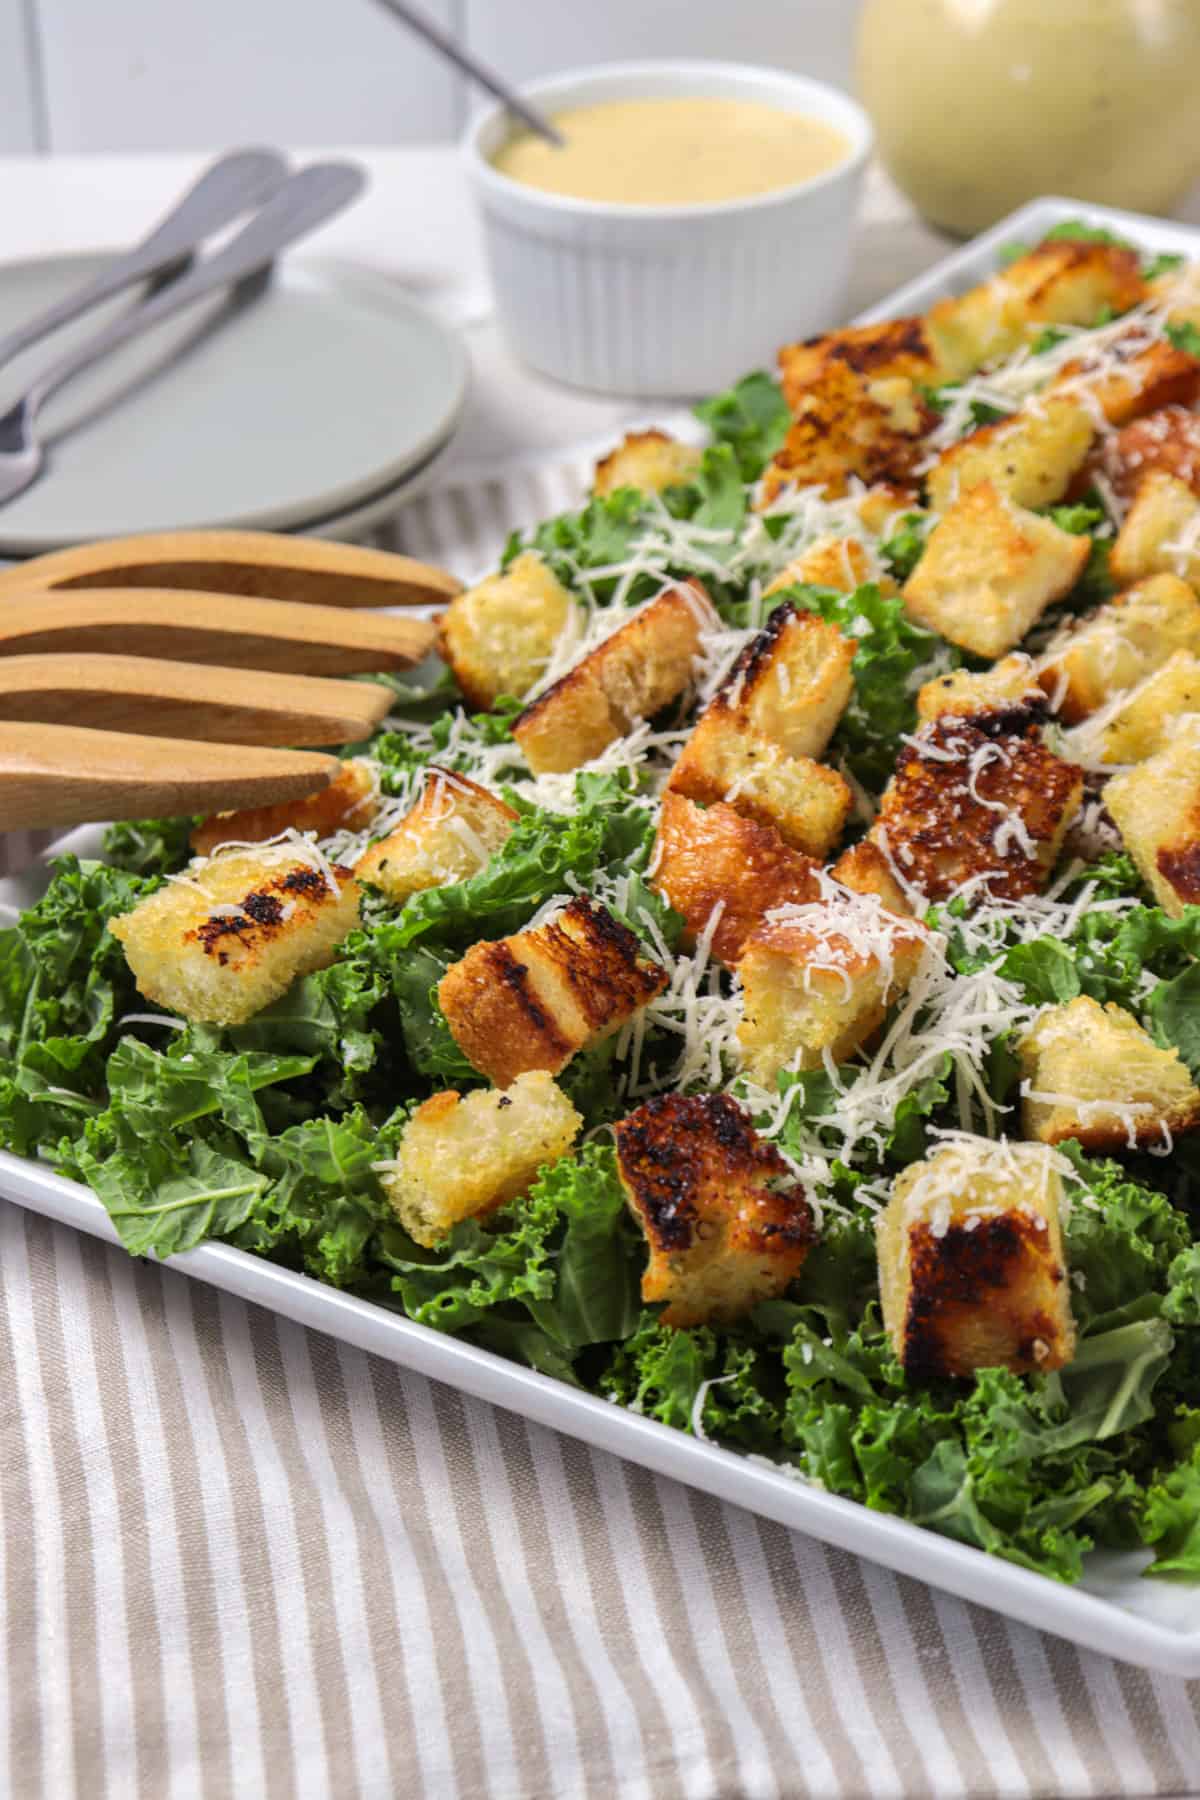 Kale Caesar salad with croutons and Parmesan cheese.